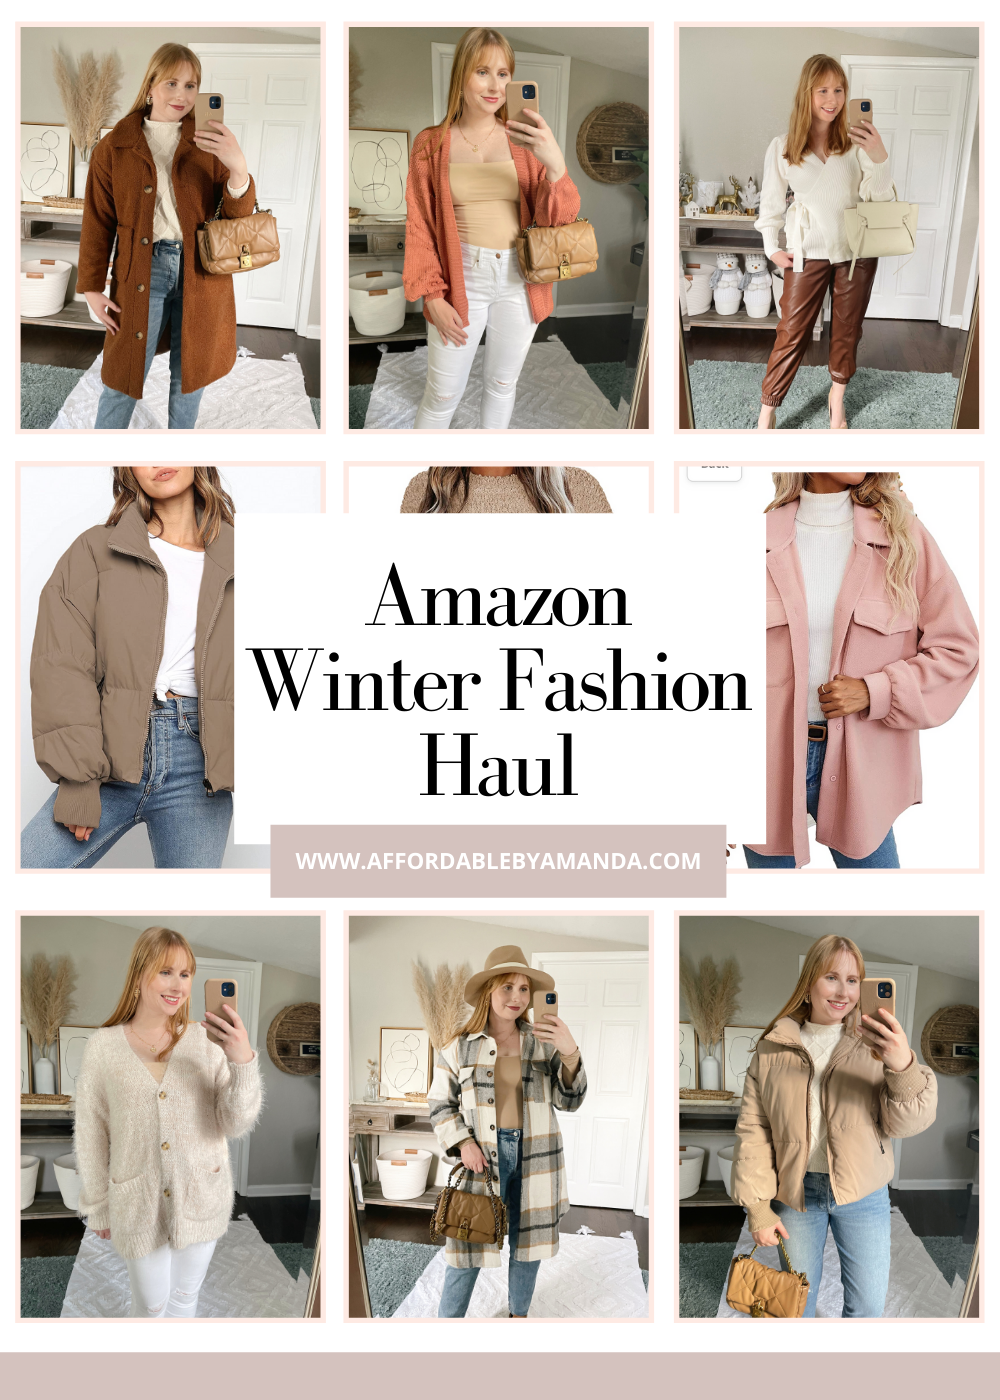 Amazon Winter Outfits for Ladies 2021. Amazon Winter Clothes for Ladies. Amazon Winter Fashion Haul 2022. Affordable by Amanda